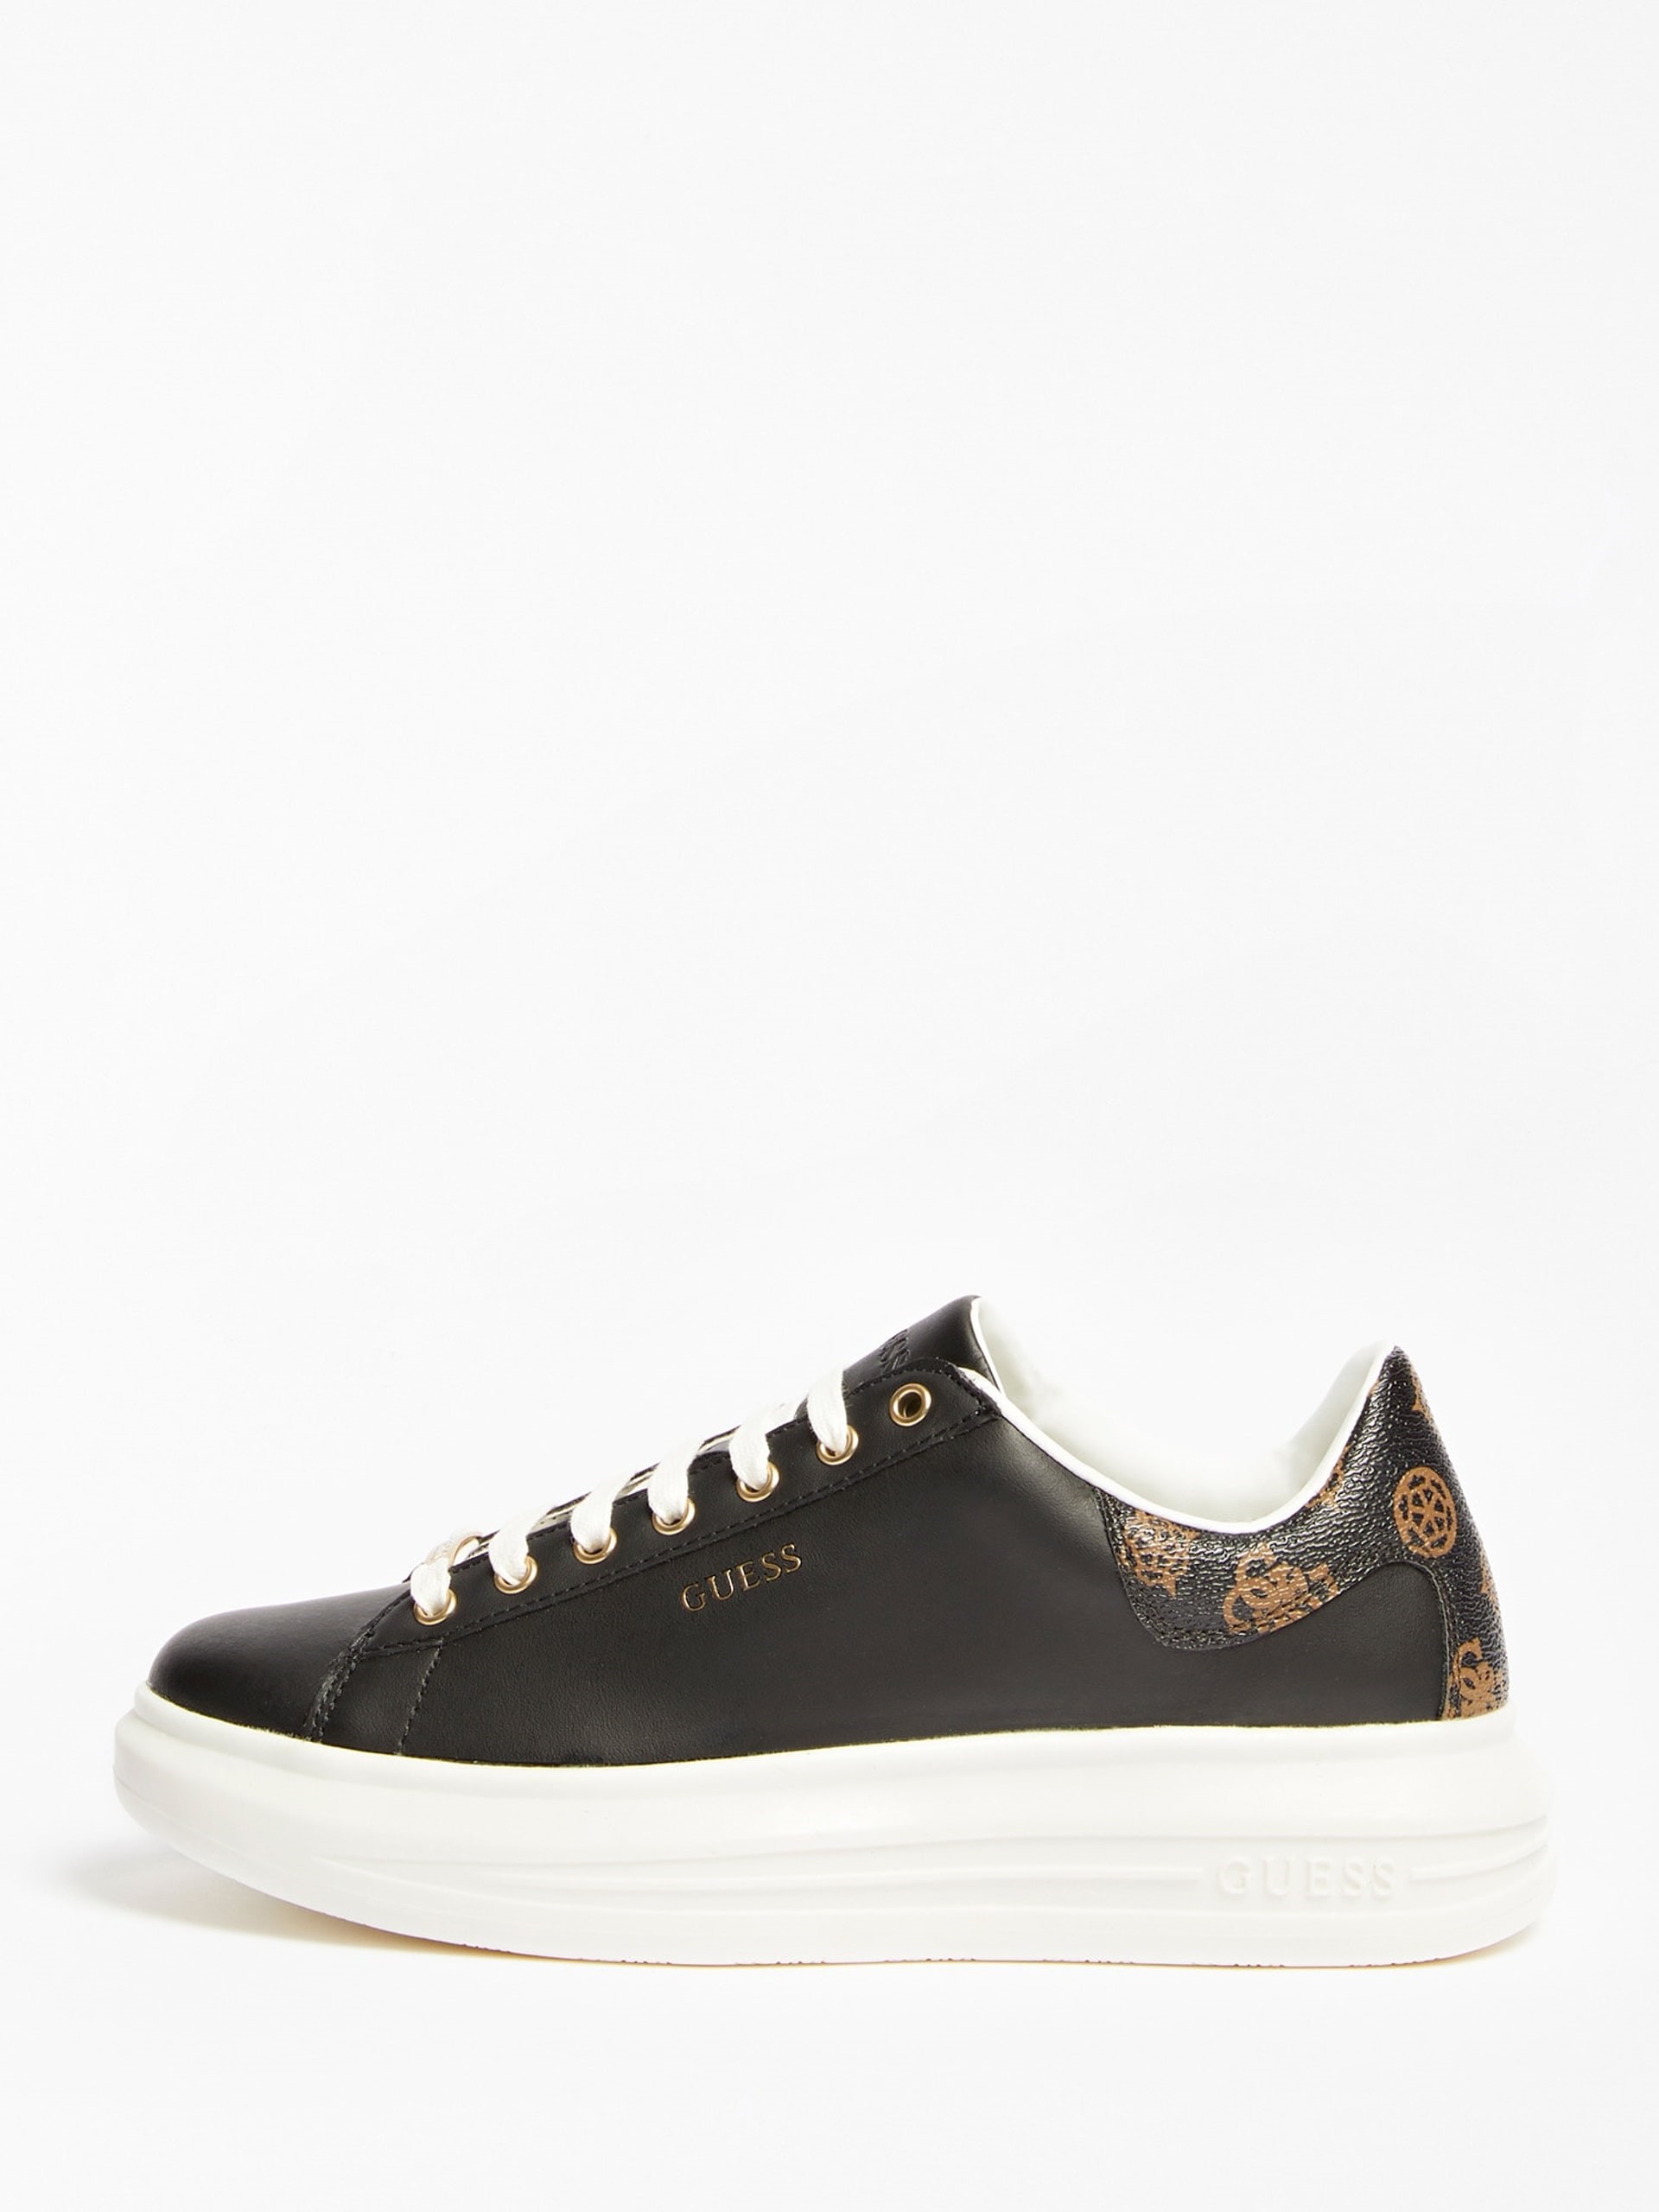 Guess Vibo Mixed Leather Sneaker - BeeSuperstar